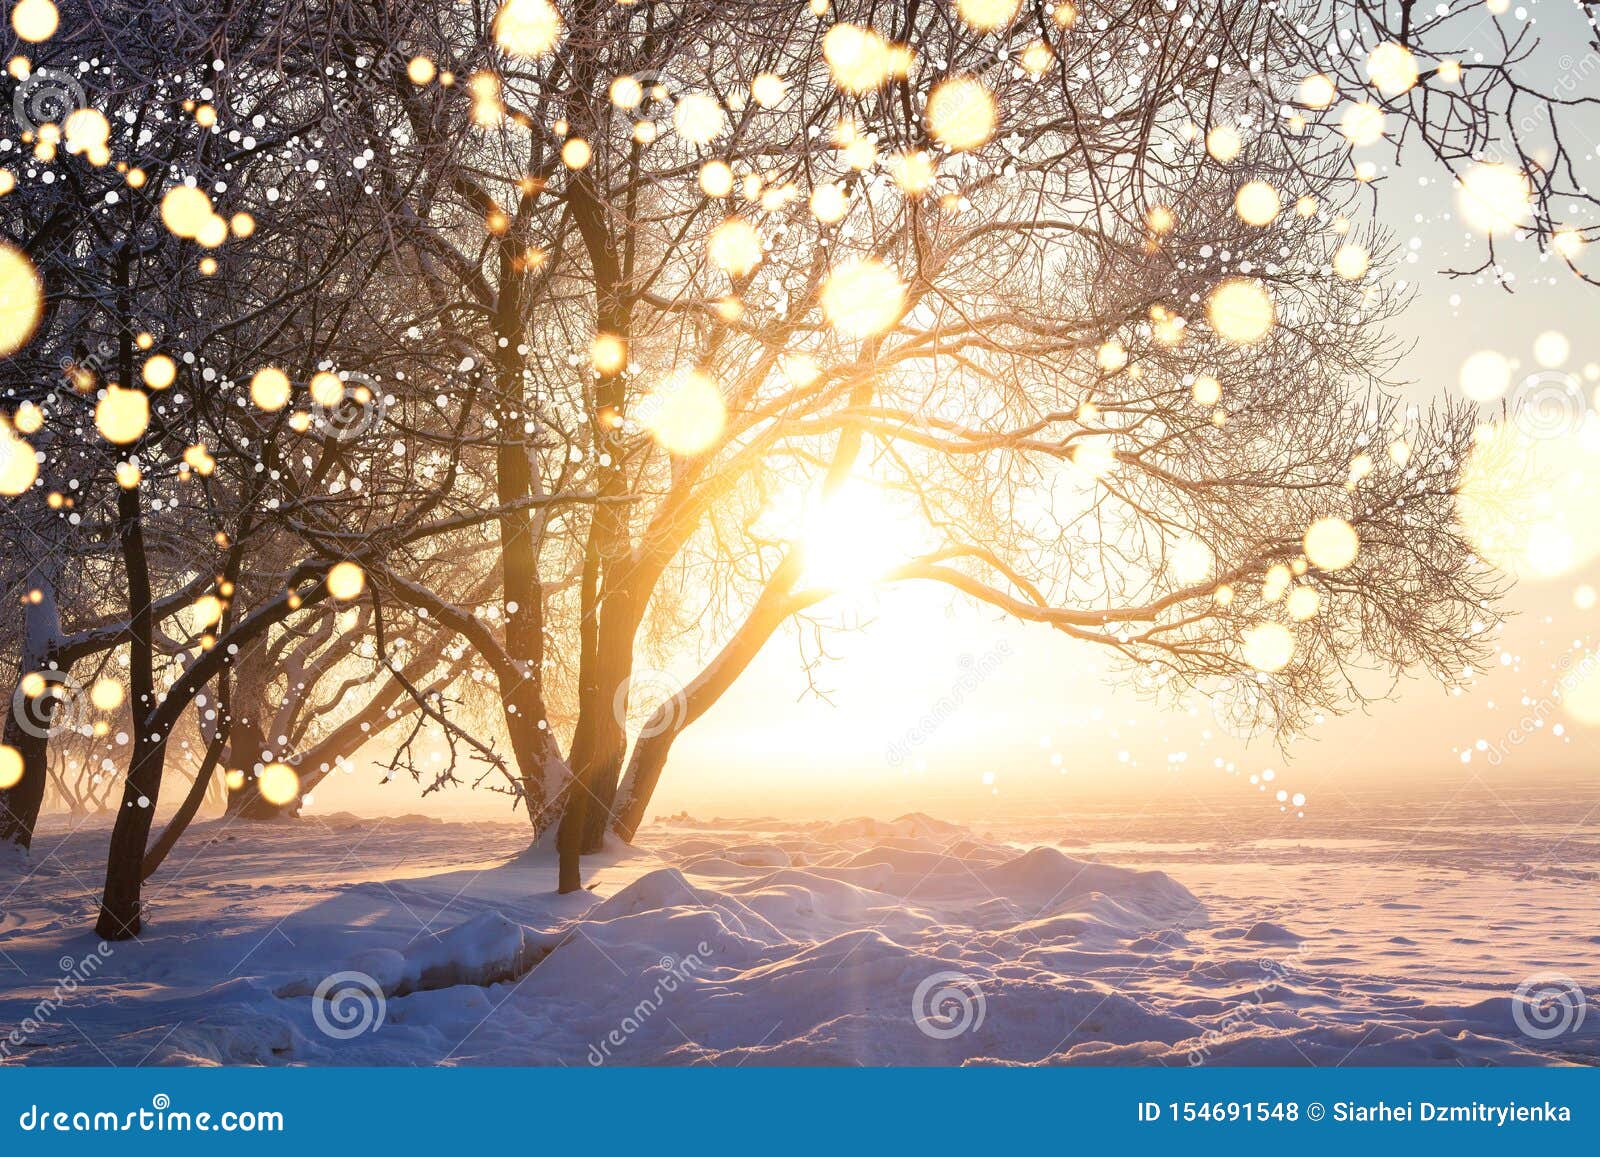 Winter Christmas Background. Illuminated Snowflakes Bokeh. Winter Nature Landscape with Bright Sun. Snowflakes in Sunlight. Winter Stock Photo - of snow, snowy: 154691548